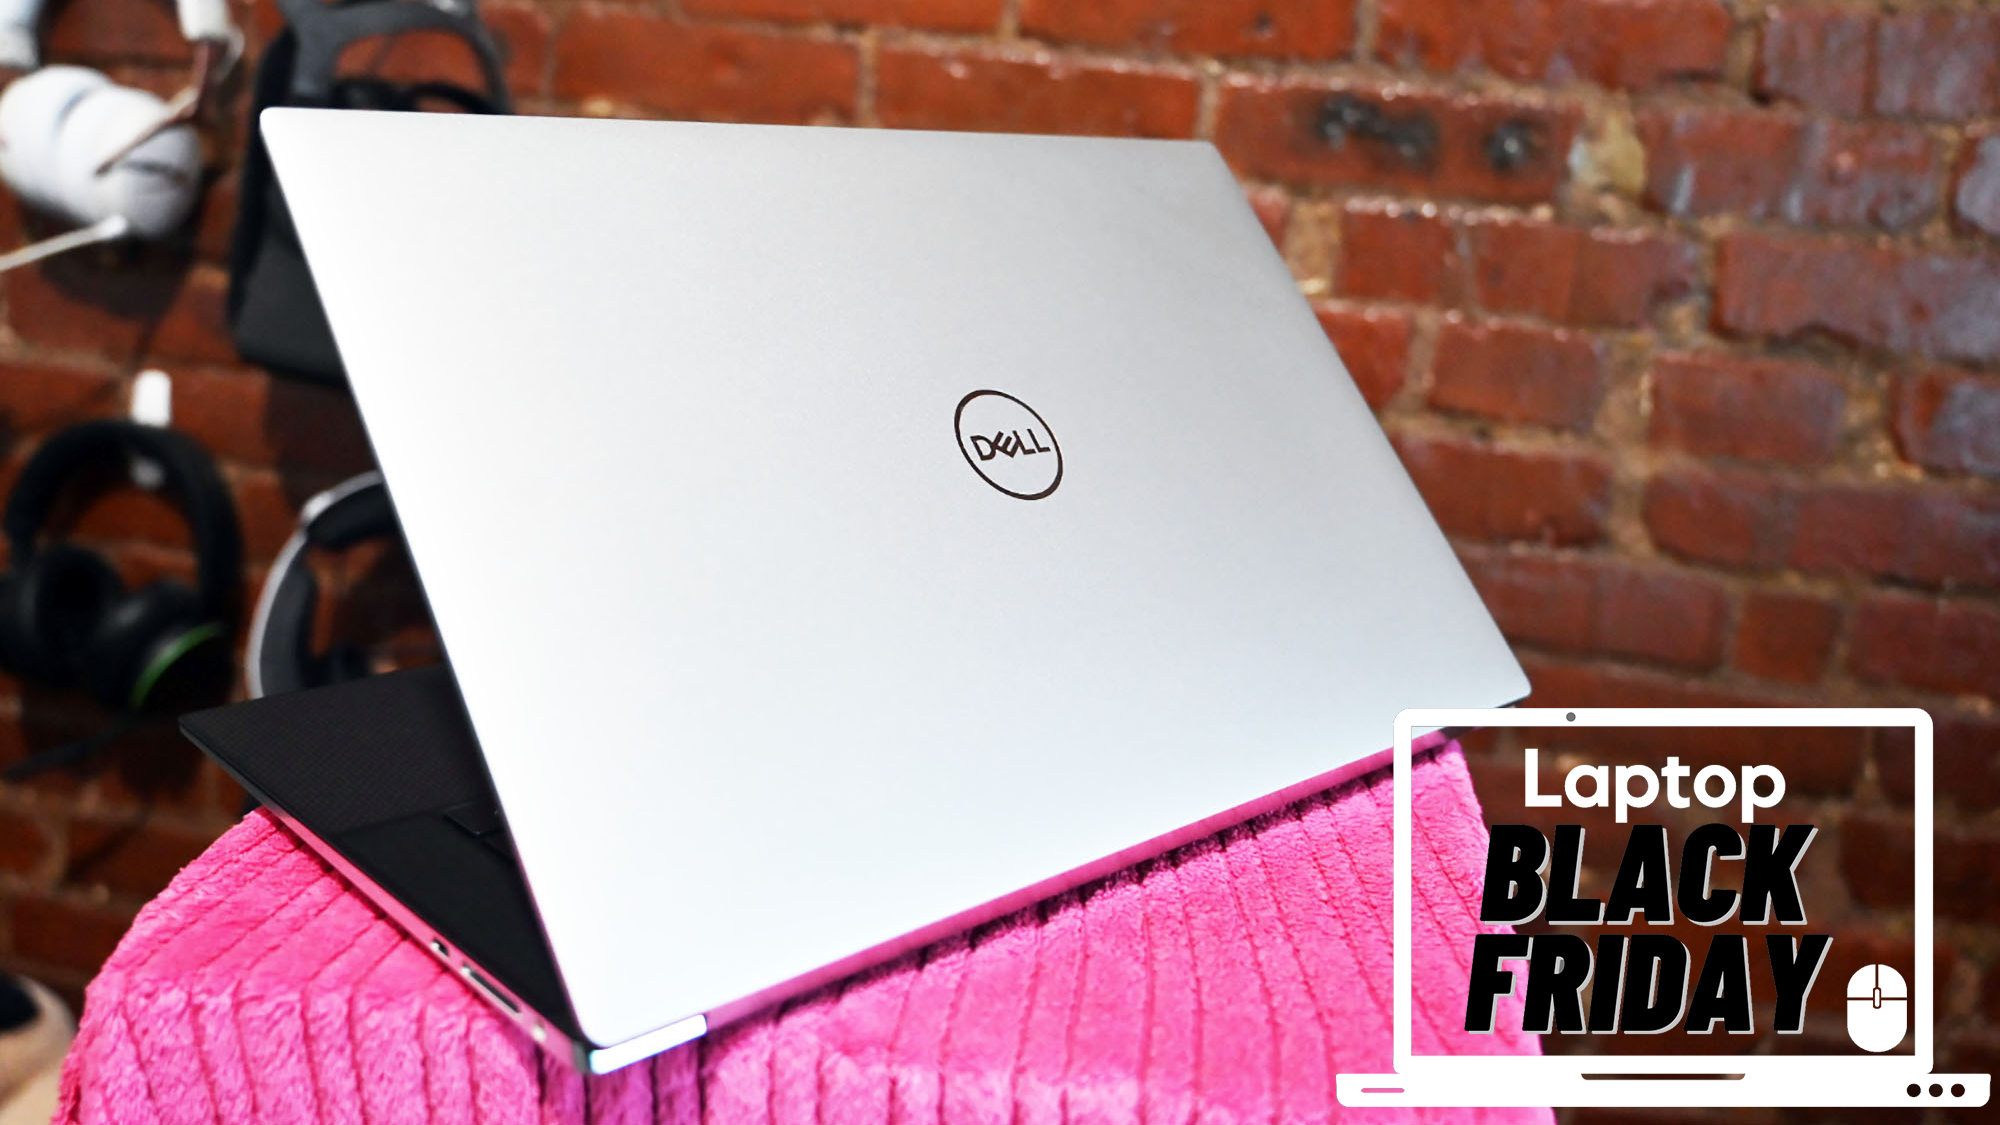 Dell XPS 15 with a massive 64GB of RAM is $510 off right now